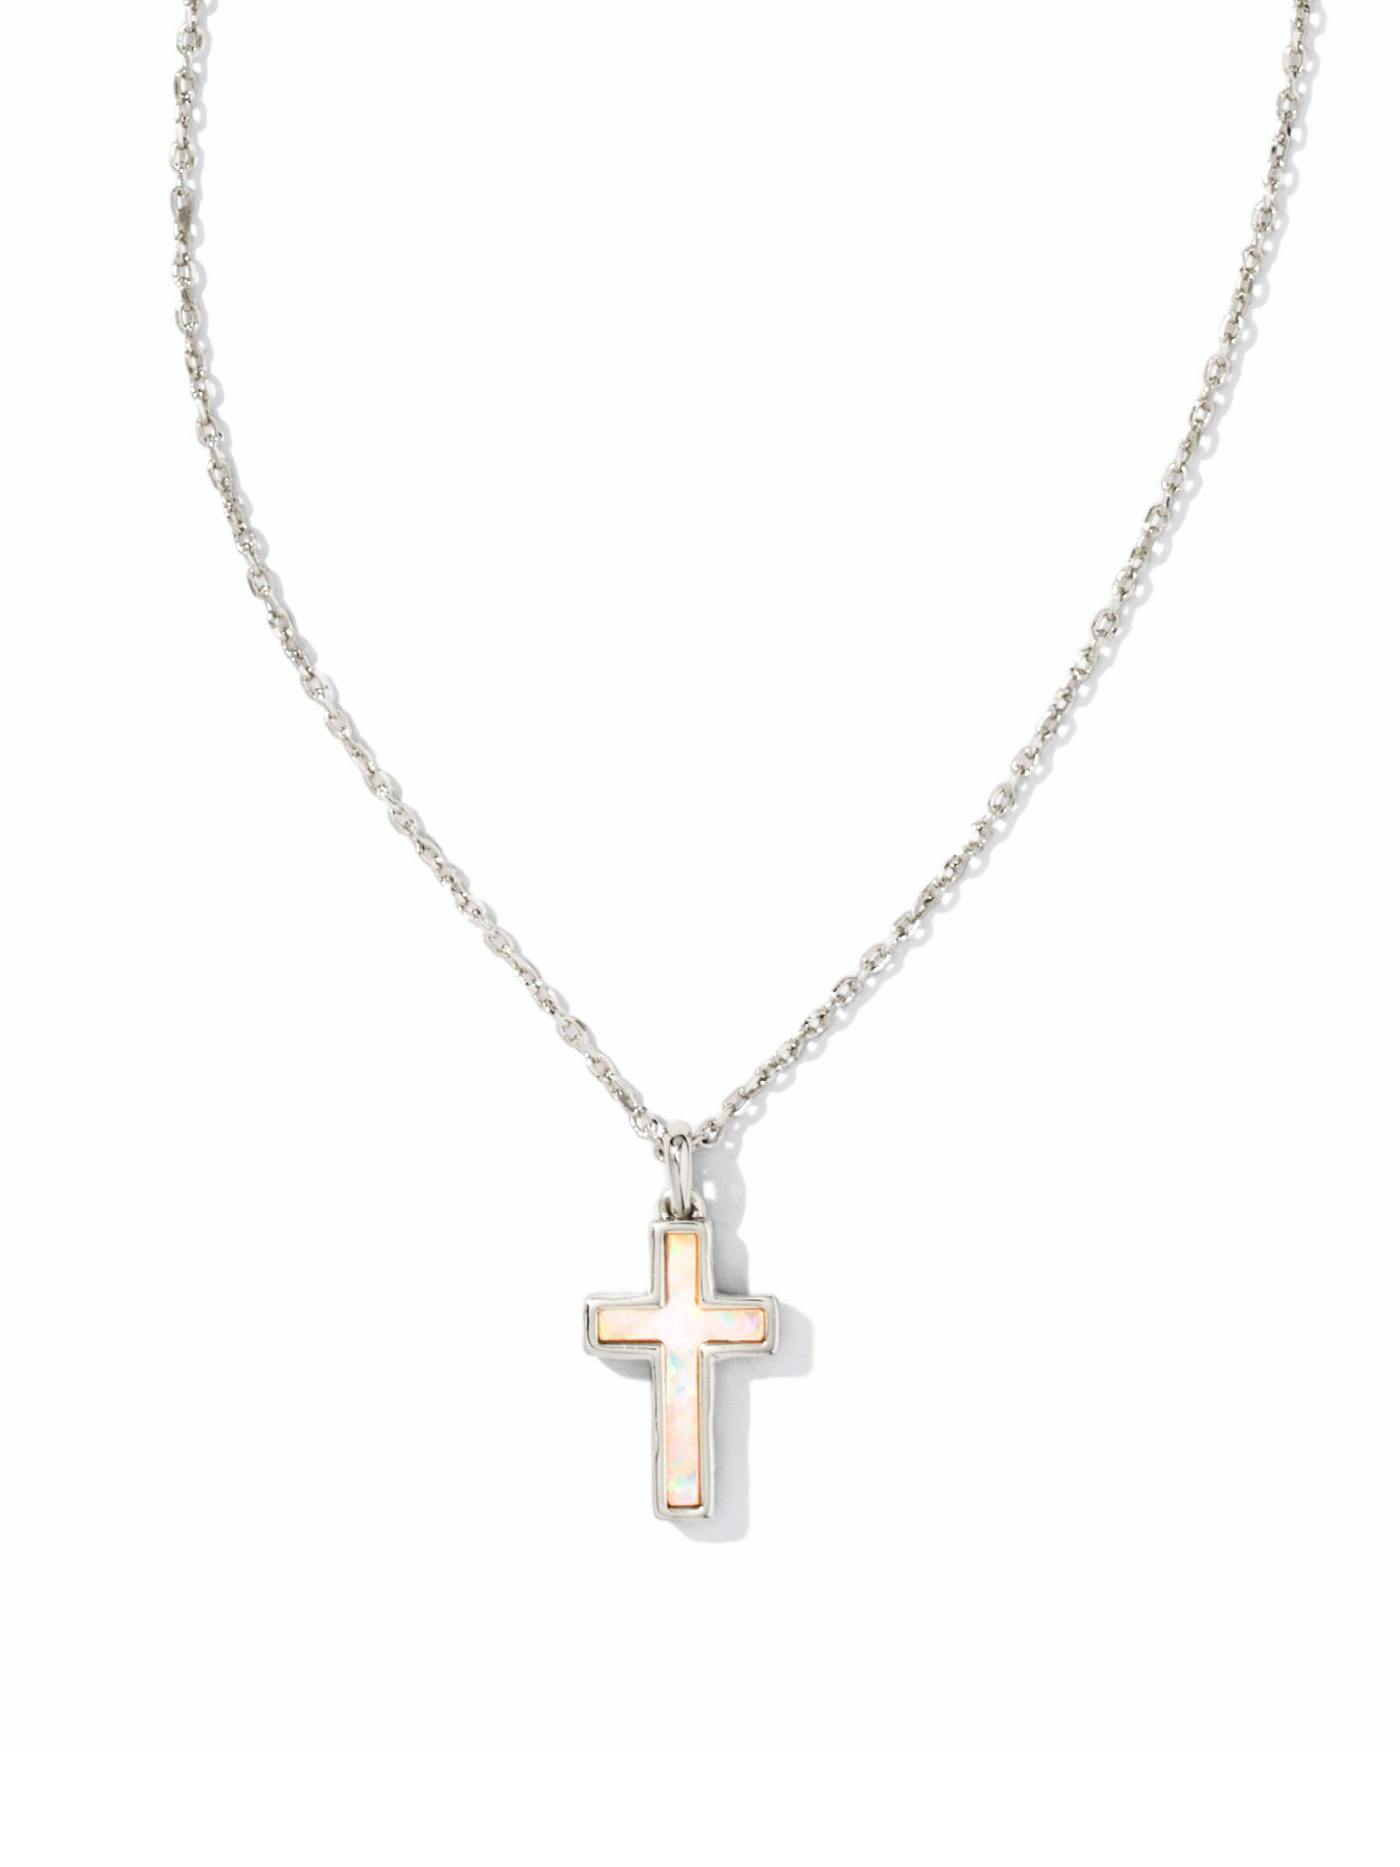 Cross Pendant Necklace Silver White Opal on white background, front view.